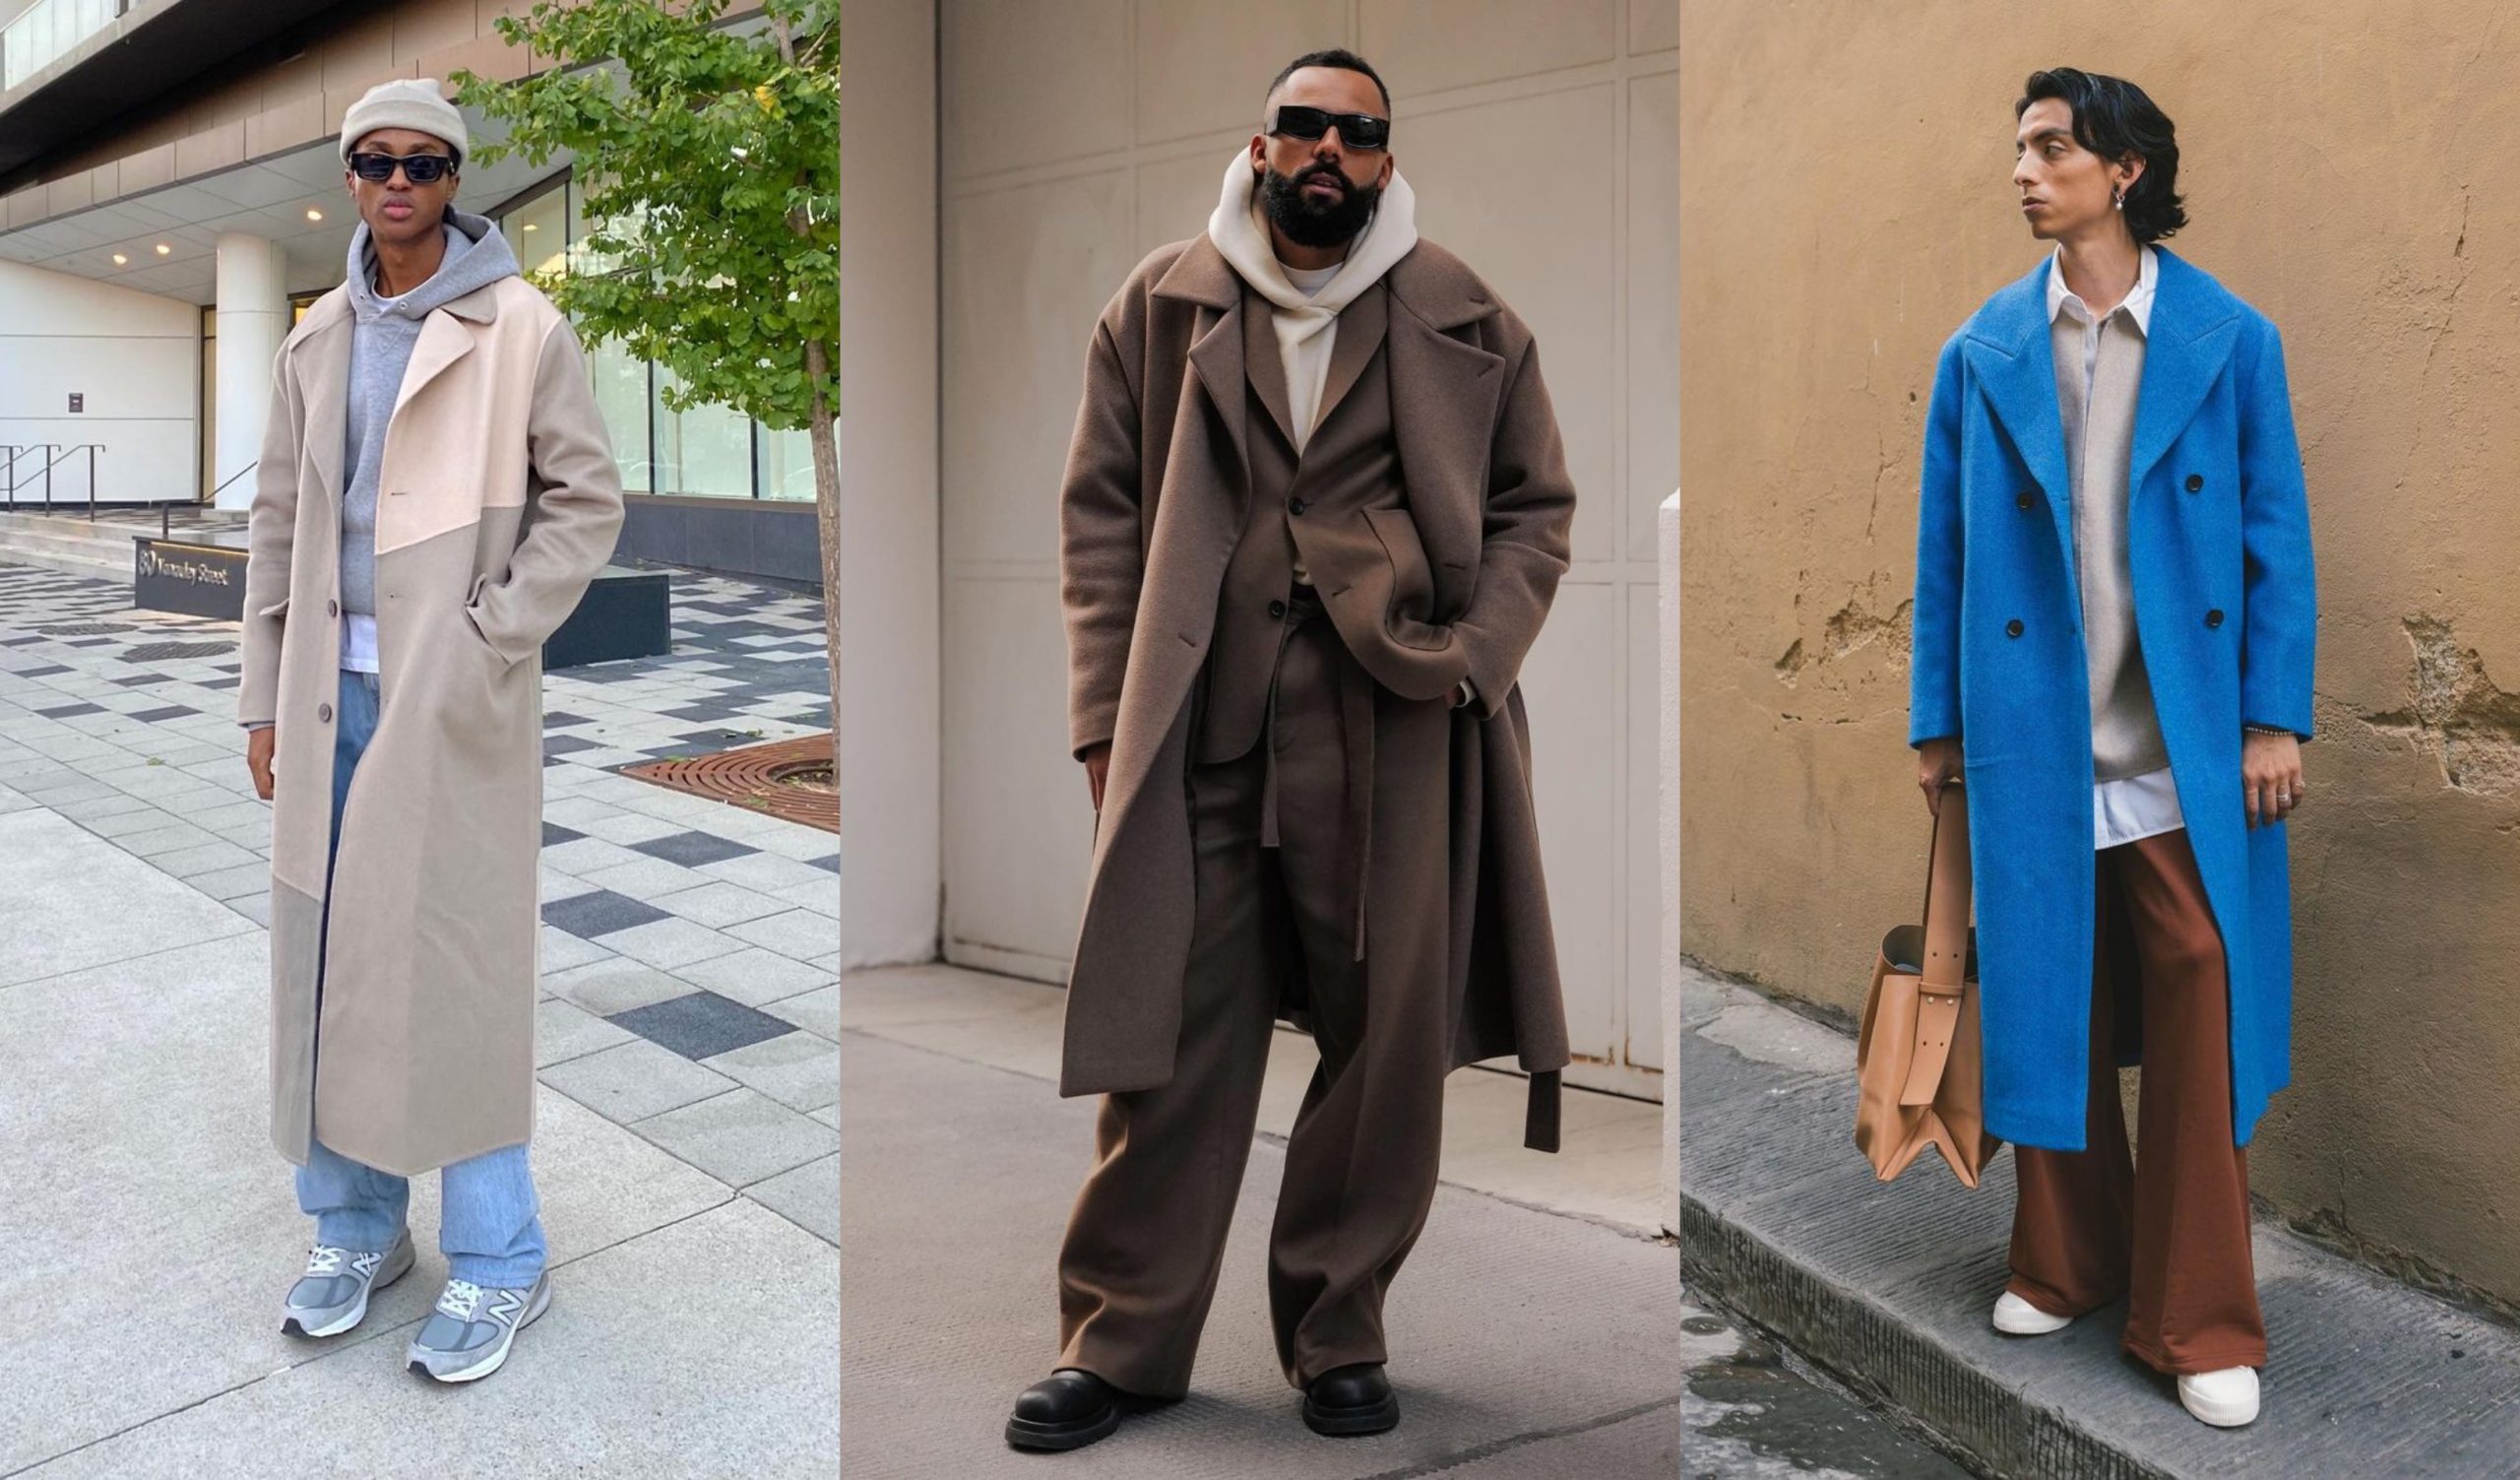 How to layer clothes like a pro - layering clothes to create